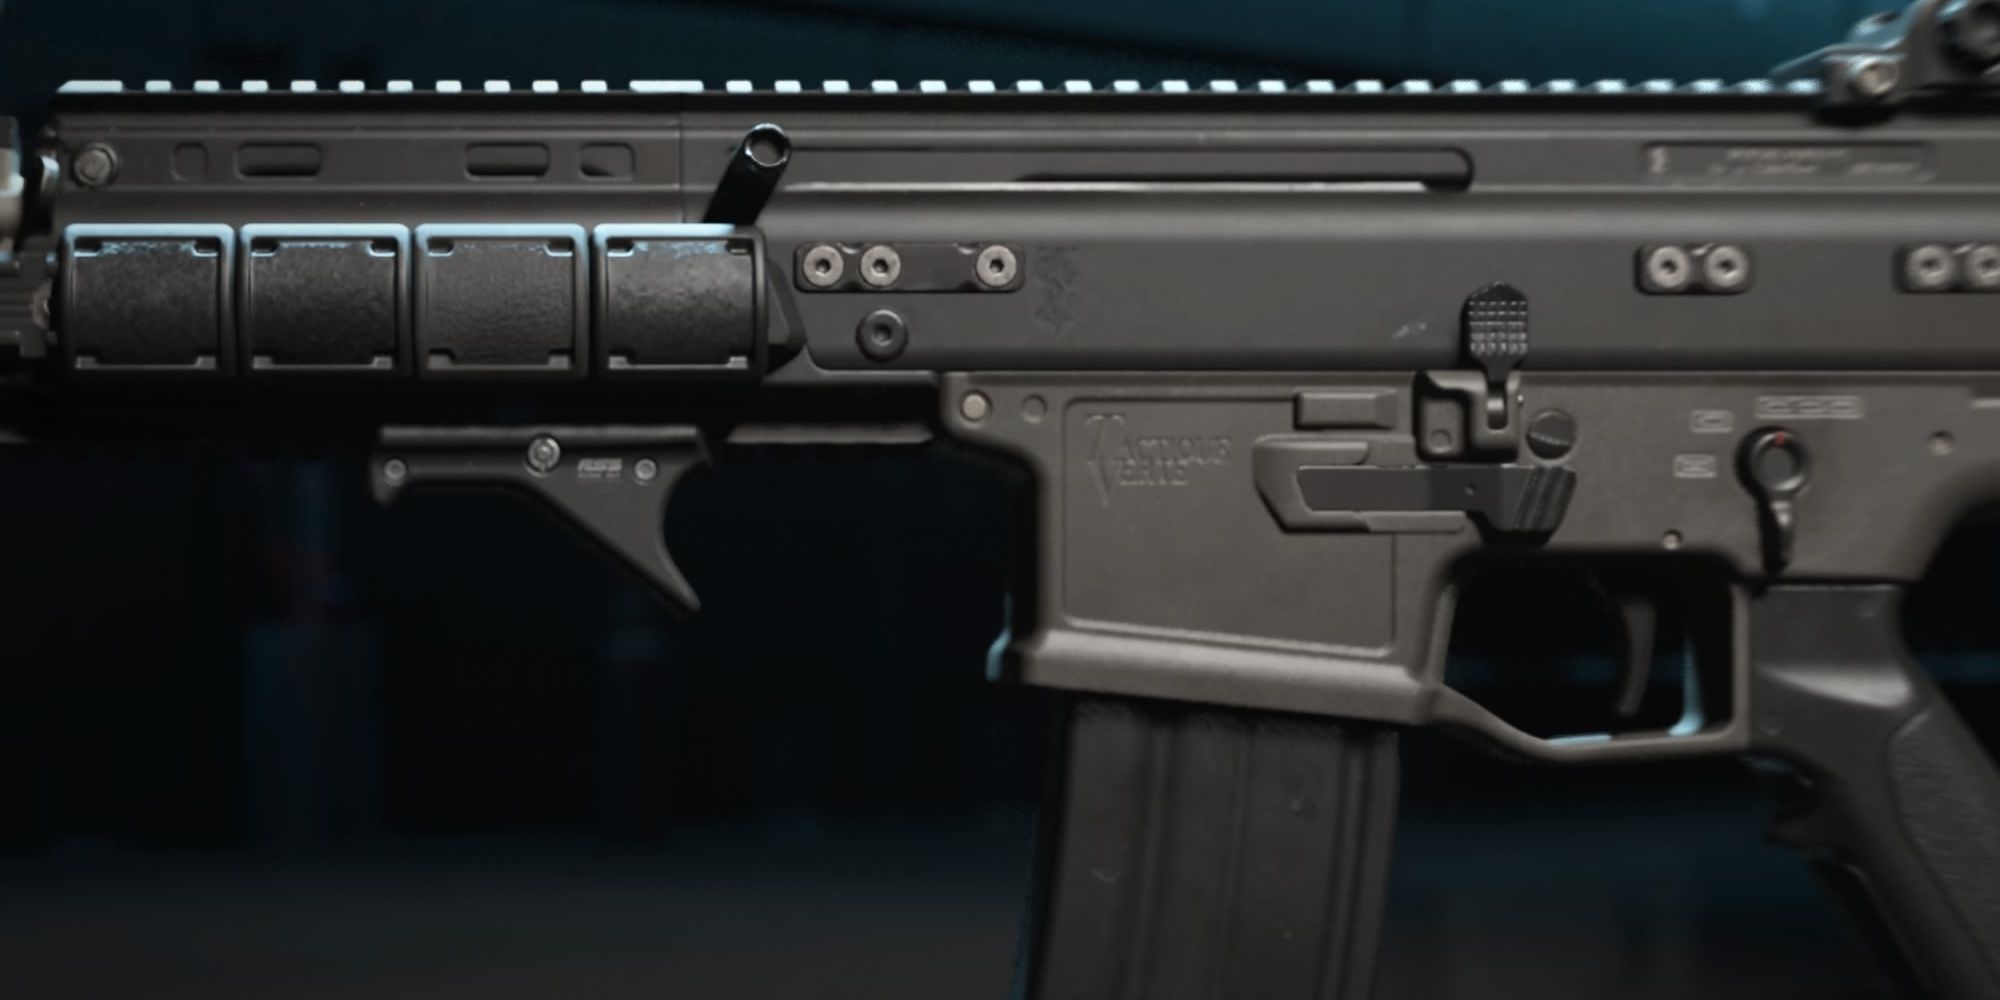 The FSS Sharkfin 90 attaches to the lower barrel of the FSS Hurricane at COD:MW2.